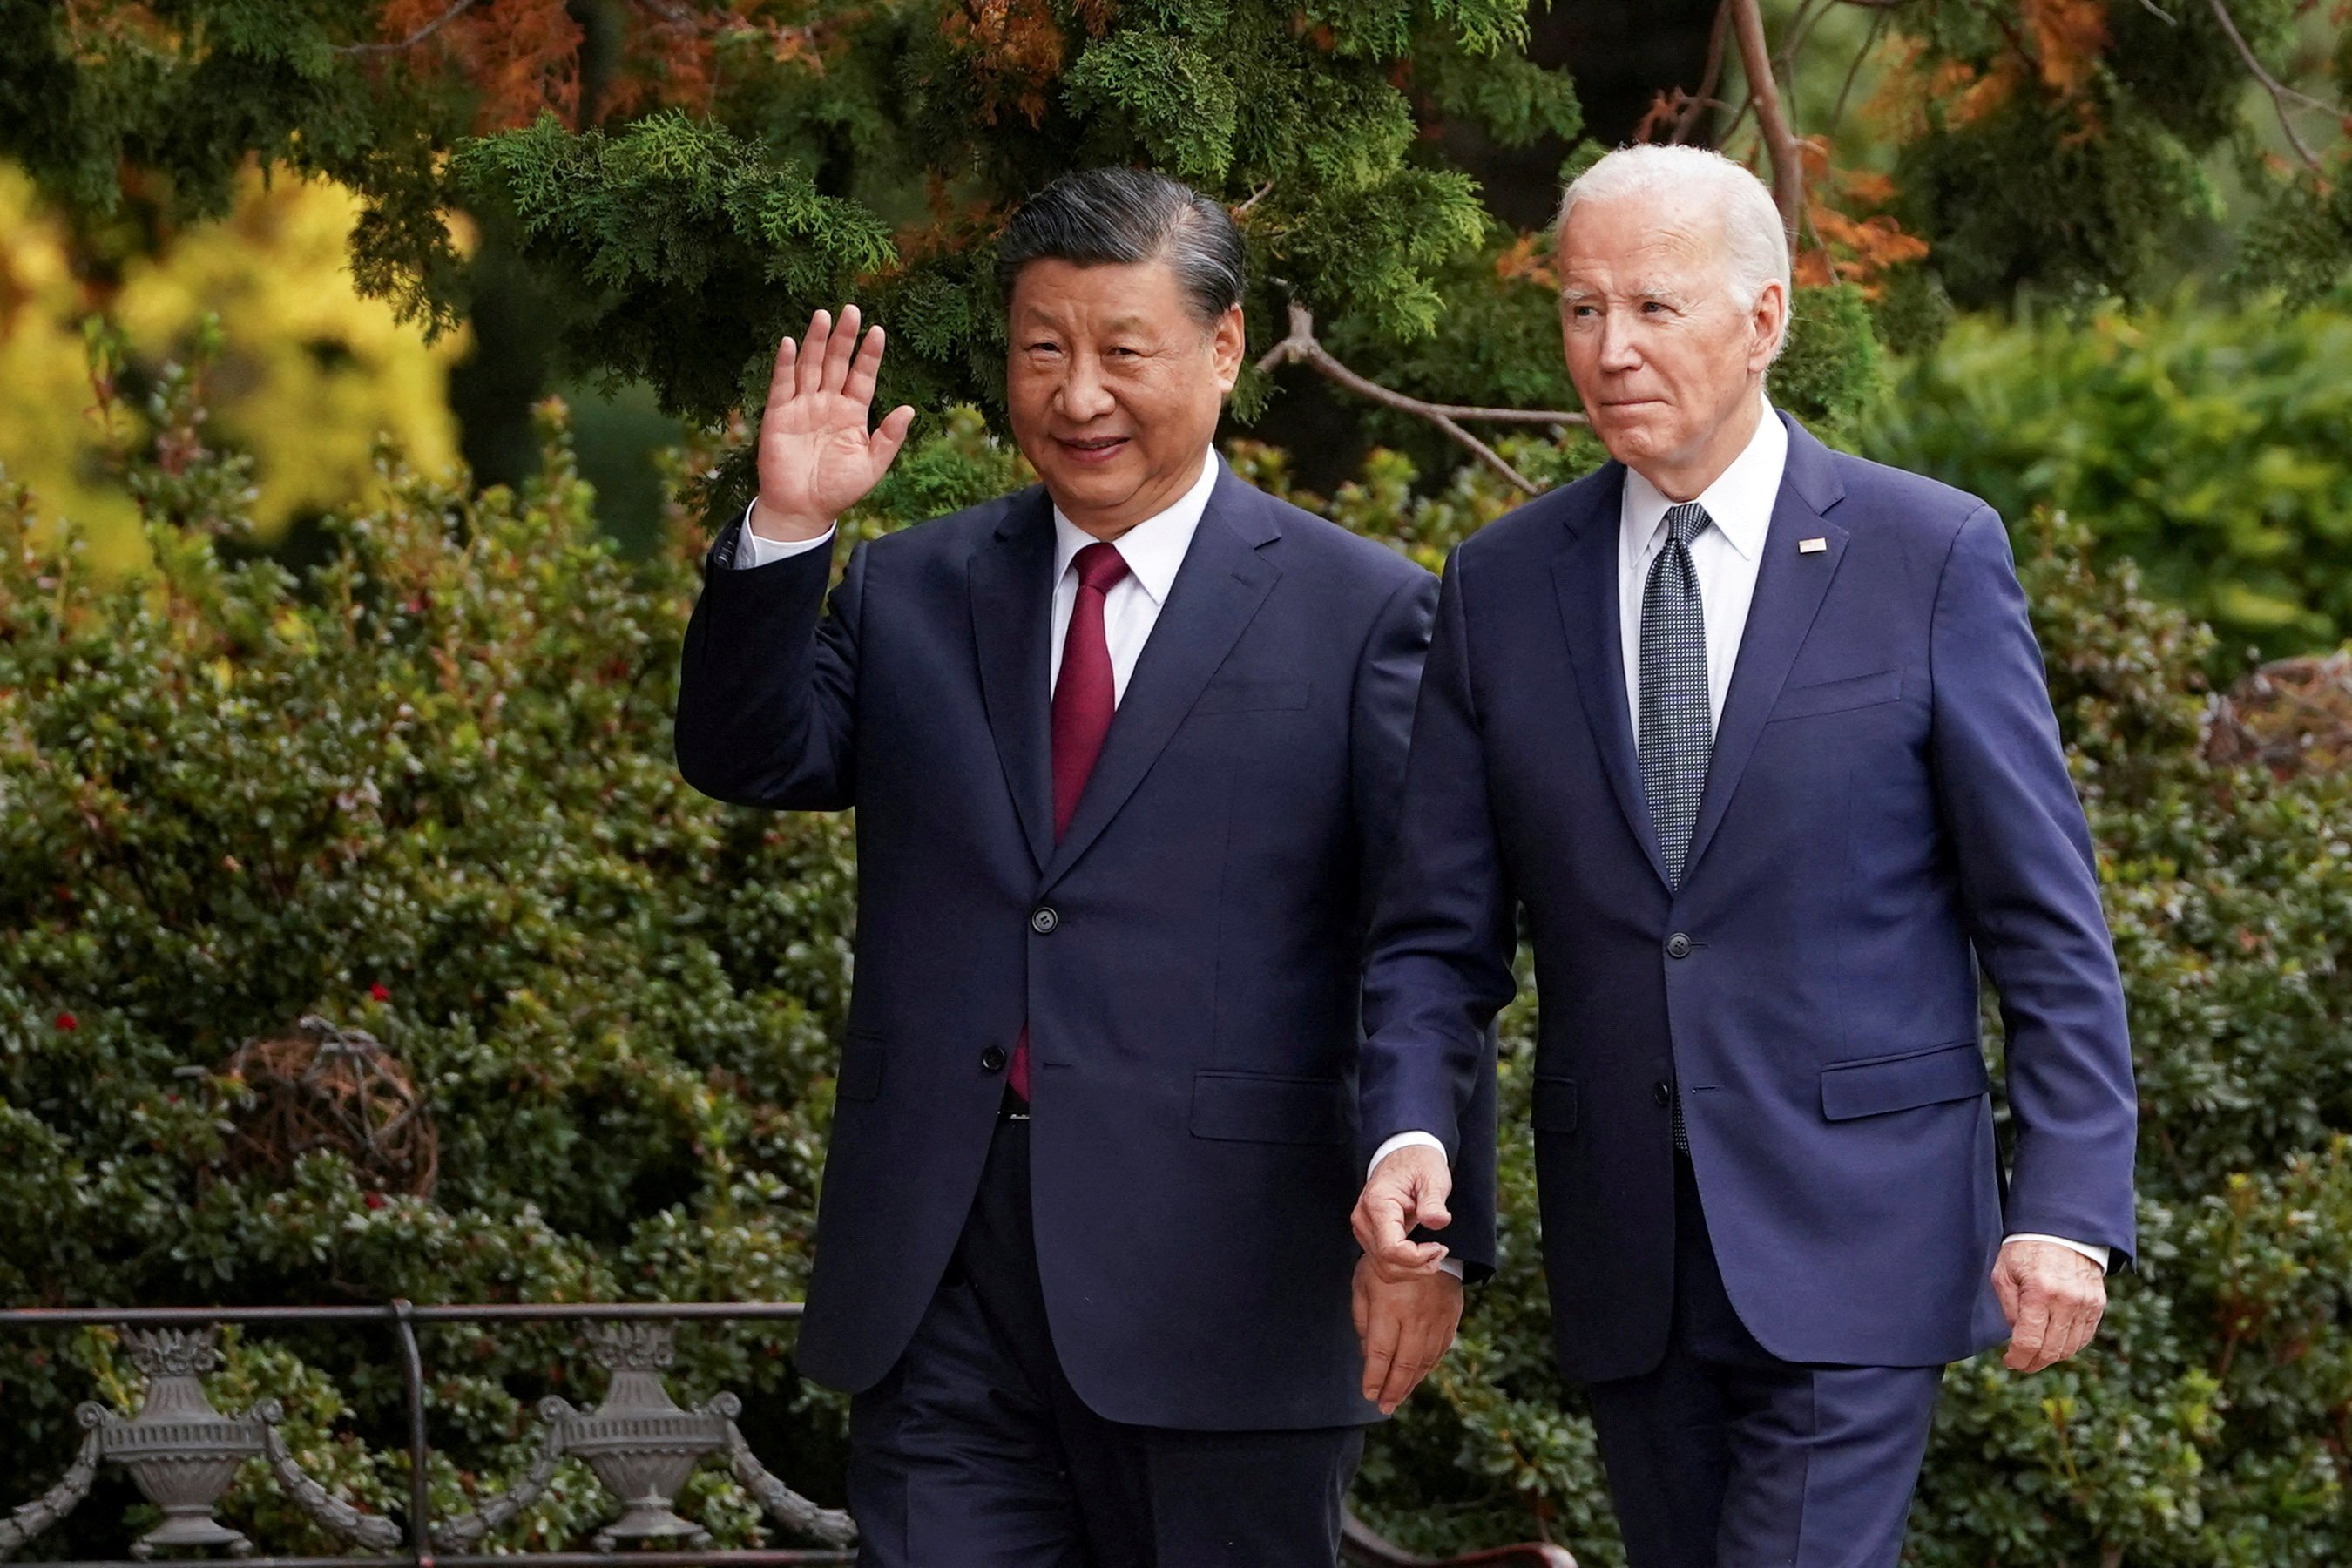 In this issue of the Global Impact newsletter, we reflect on the meeting between Joe Biden and Xi Jinping before the Asia-Pacific Economic Cooperation (Apec) leaders’ summit in San Francisco. Photo: Reuters